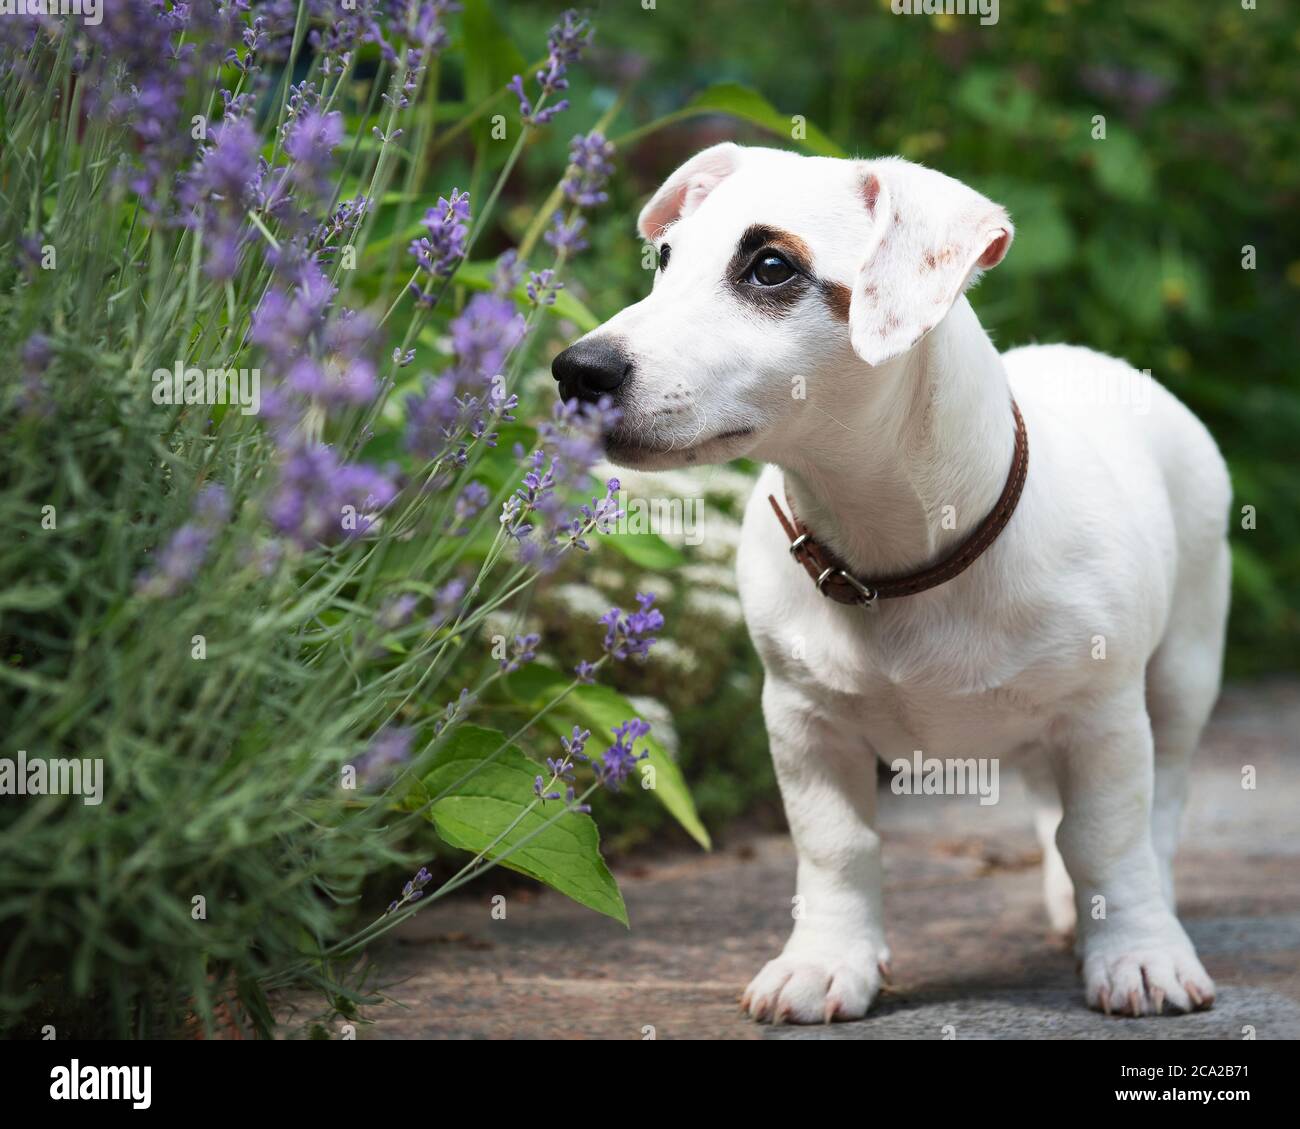 White Jack Russell terrier dog in the park on grass Stock Photo